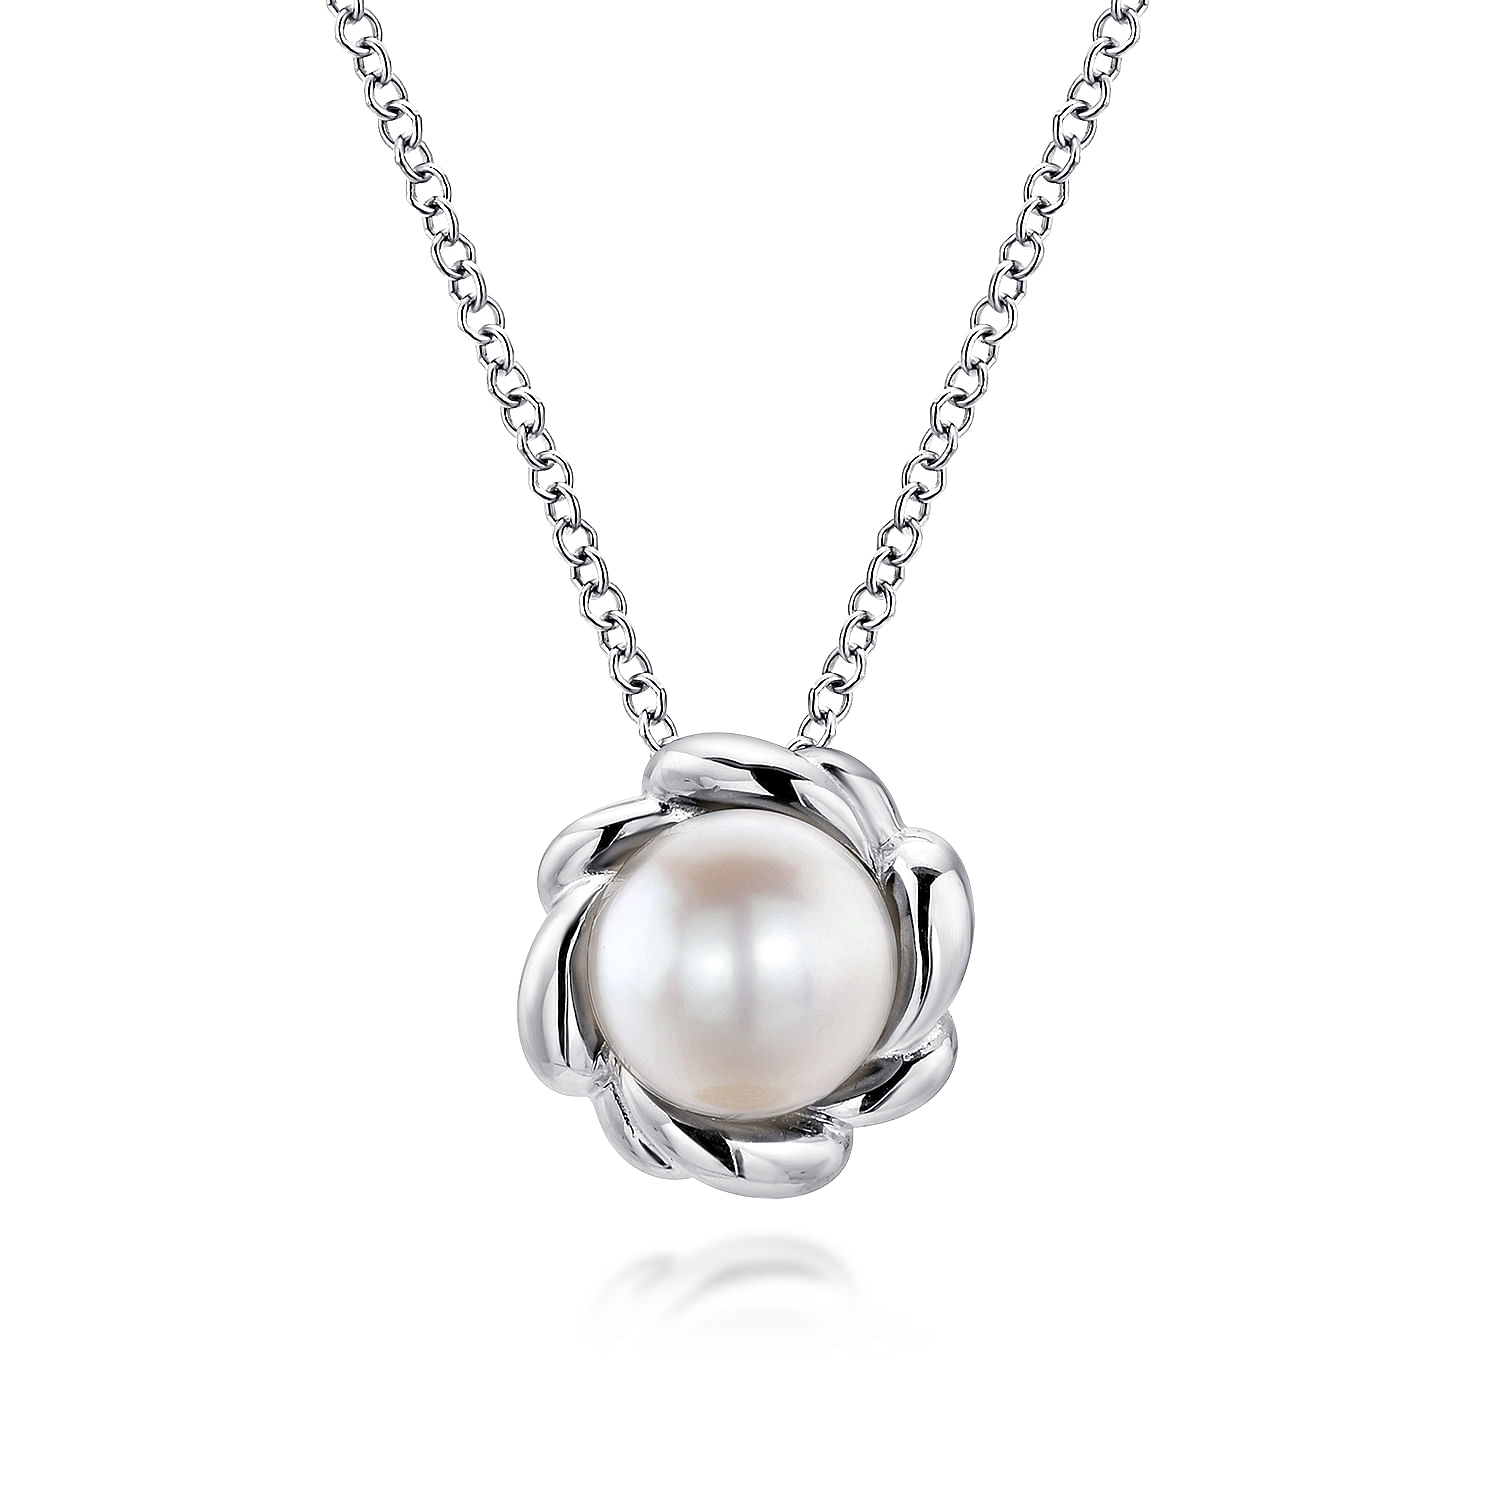 Gabriel - 925 Sterling Silver Swirling Cultured Pearl Pendant Necklace